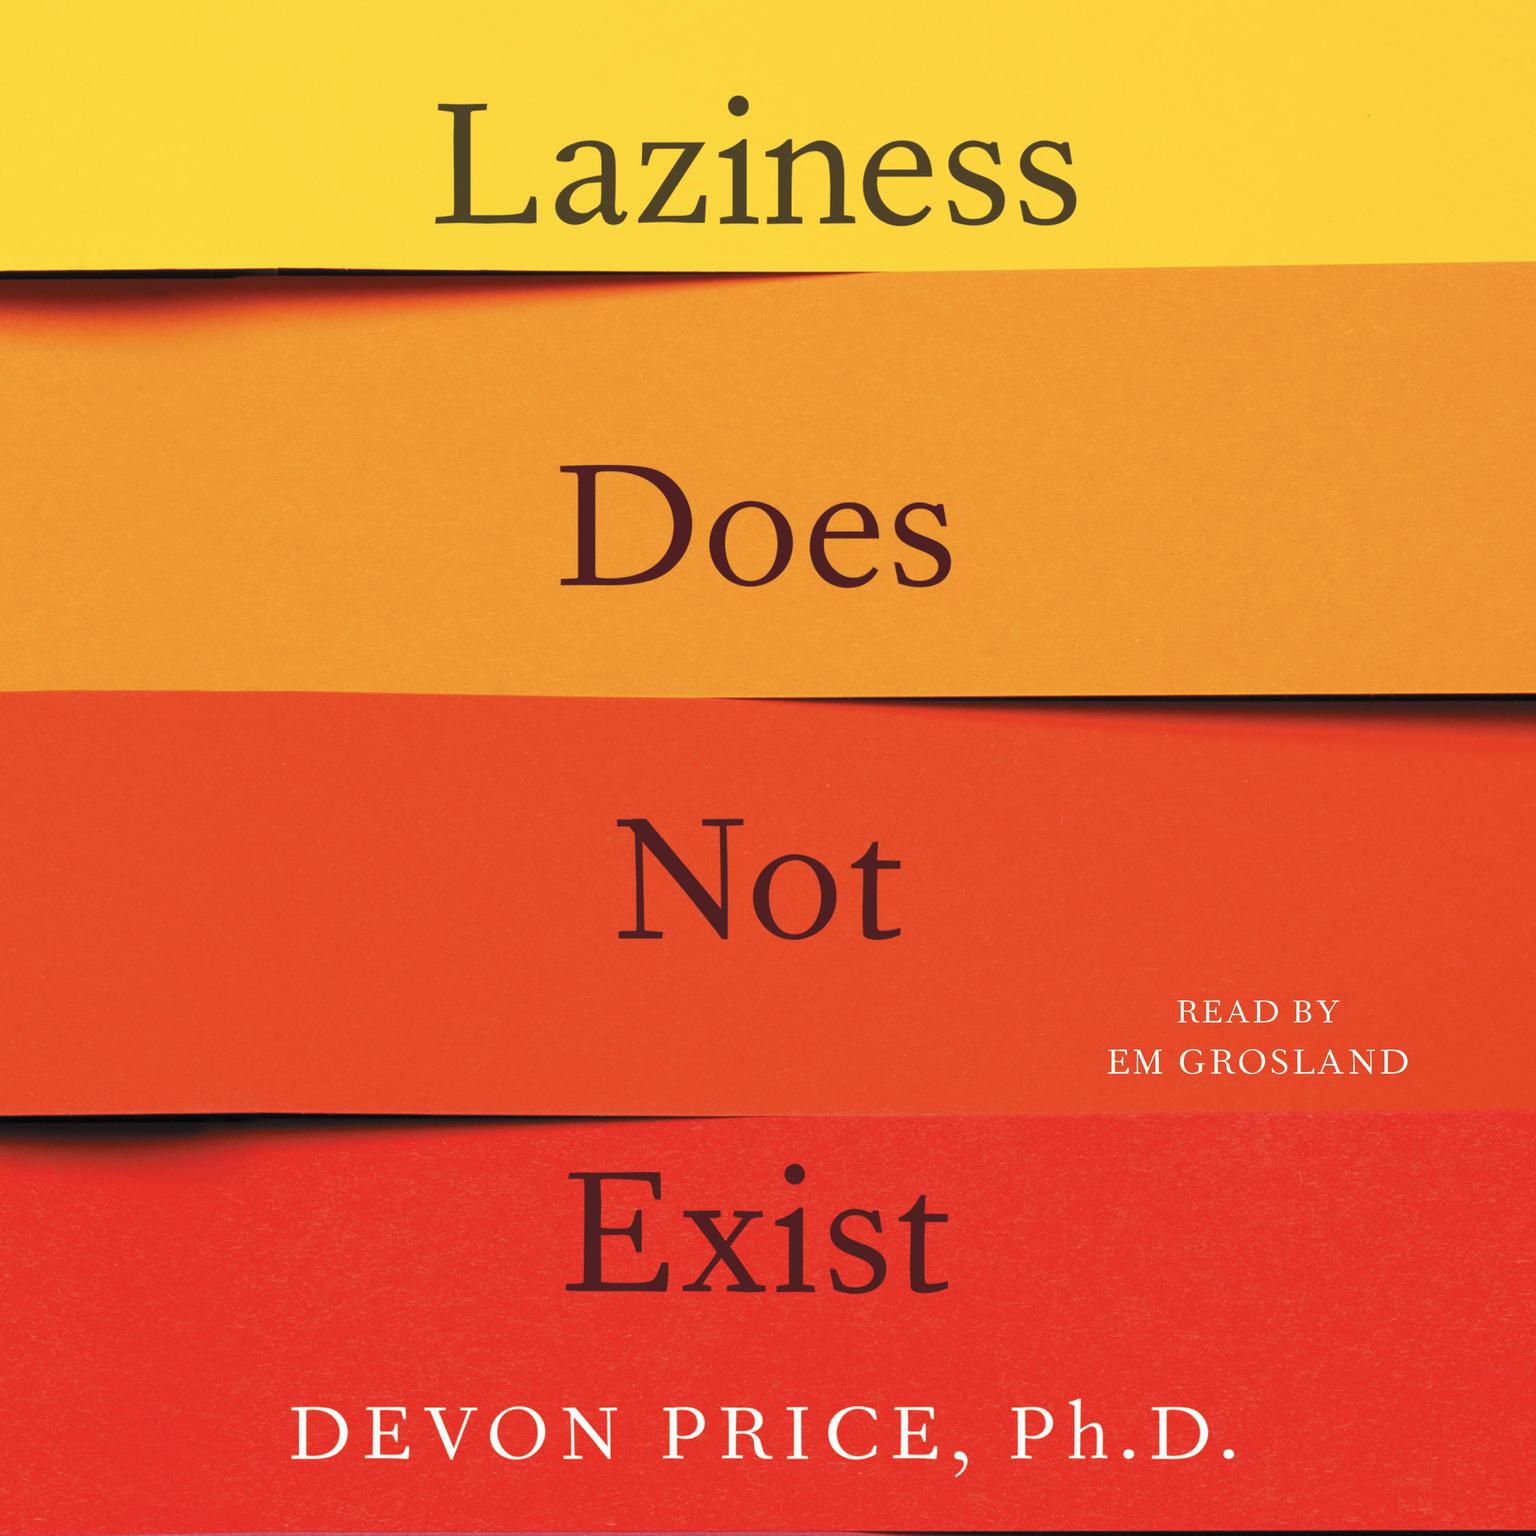 Laziness Does Not Exist: A Defense of the Exhausted, Exploited, and Overworked Audiobook, by Devon Price